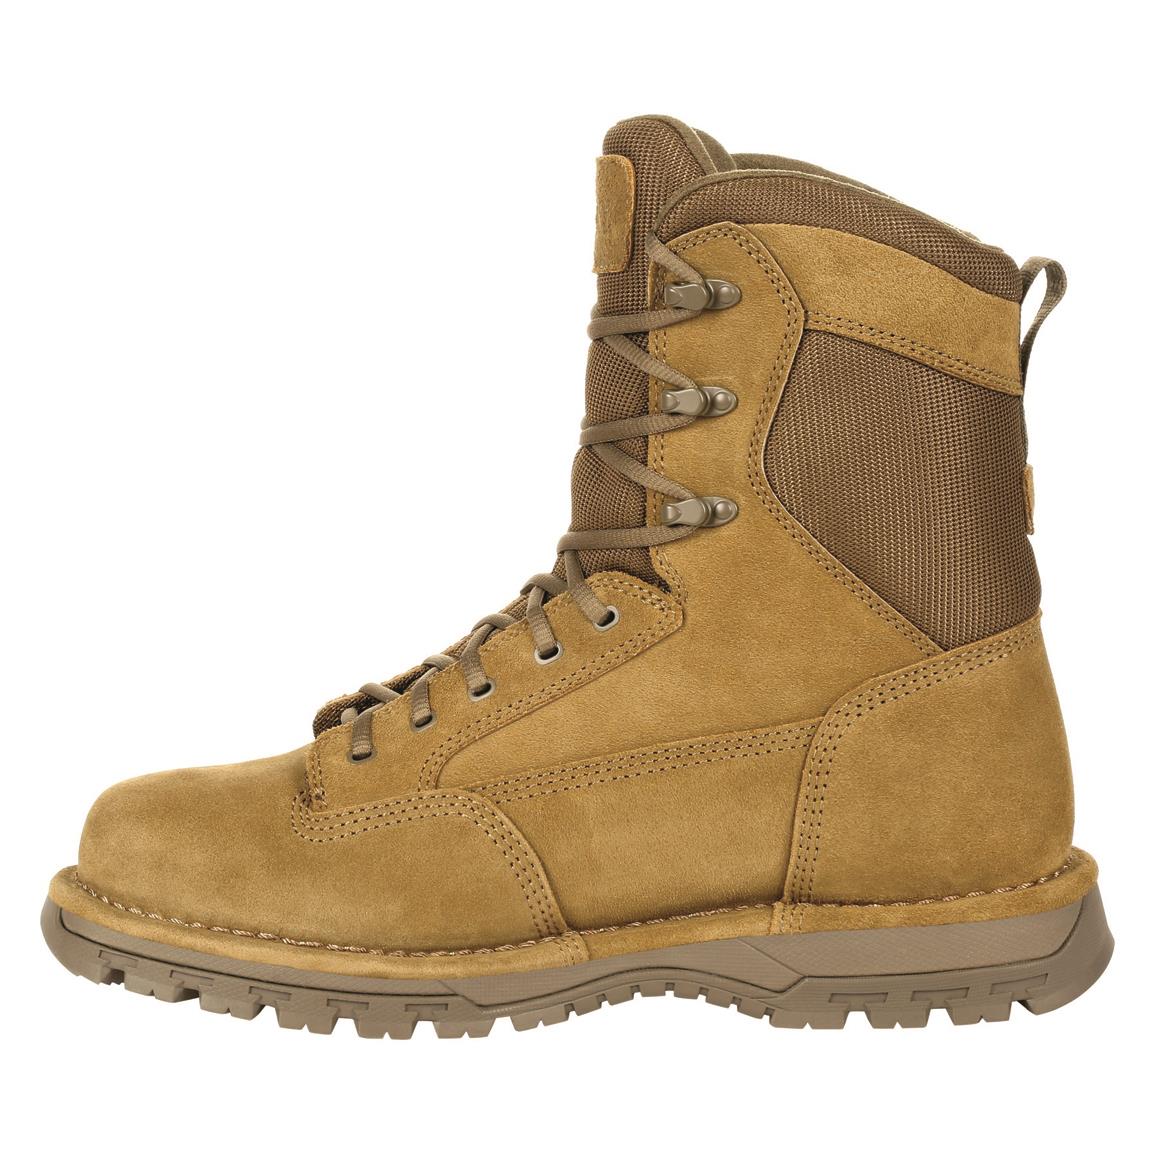 U.S. Military WWII Paratrooper Boots, Reproduction - 124490 ...